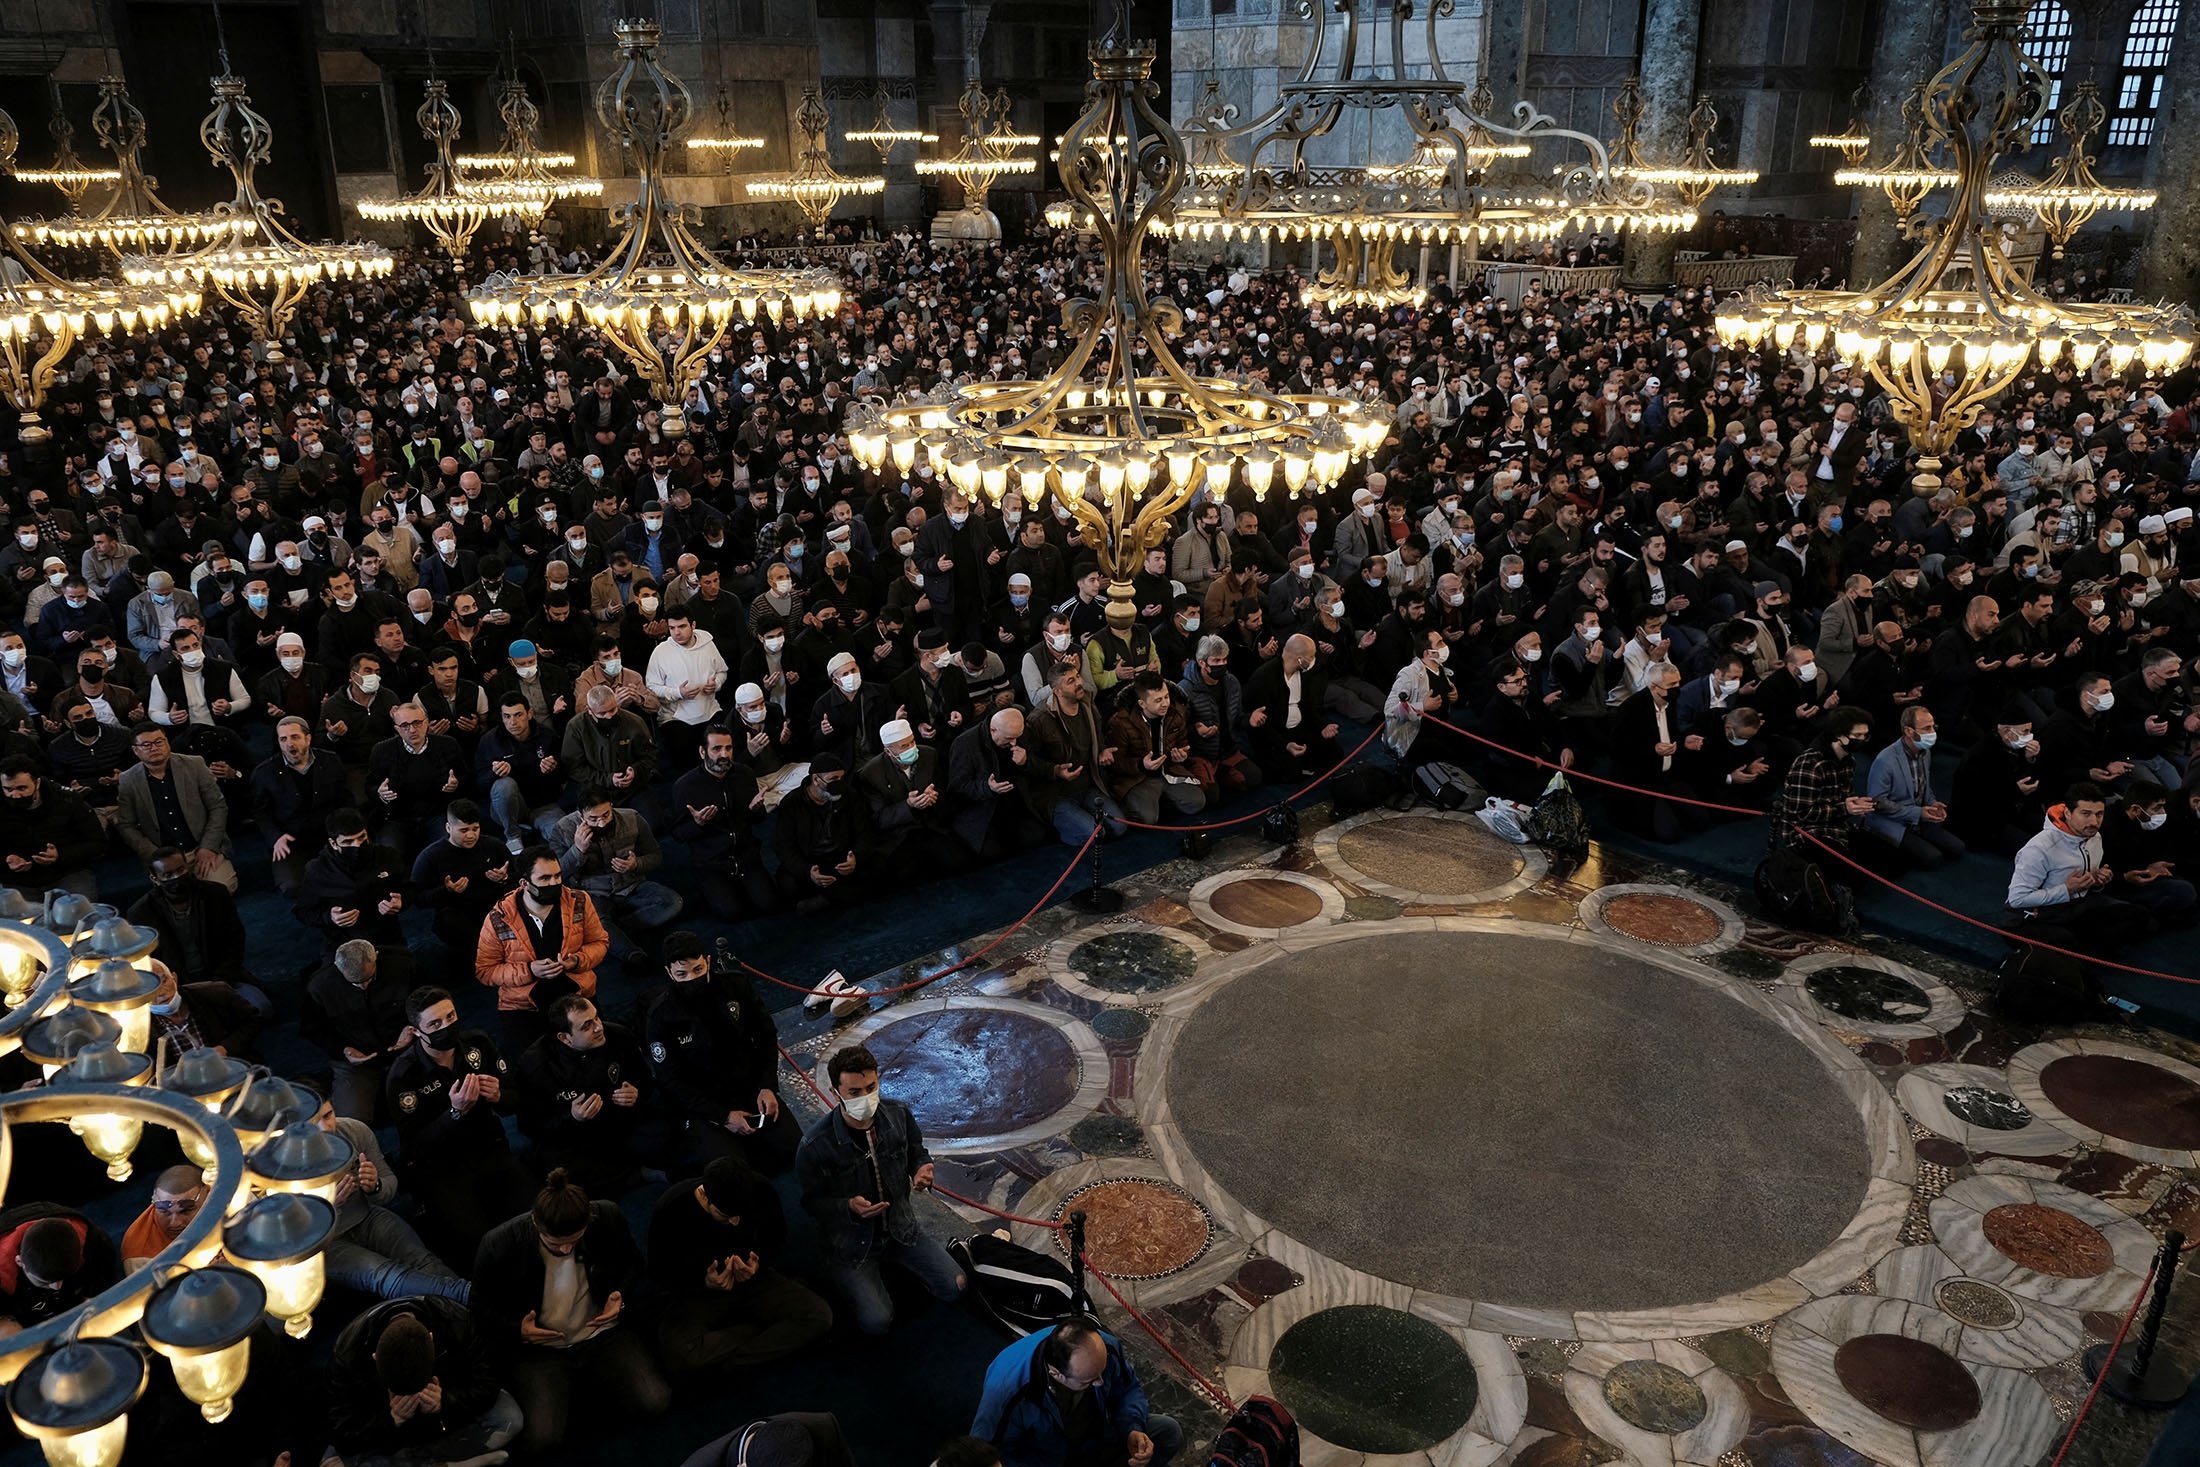 Muslims attend the first Friday prayer of Ramadan, at Hagia Sophia Grand Mosque in Istanbul, Turkey, April 8, 2022. (Reuters Photo)